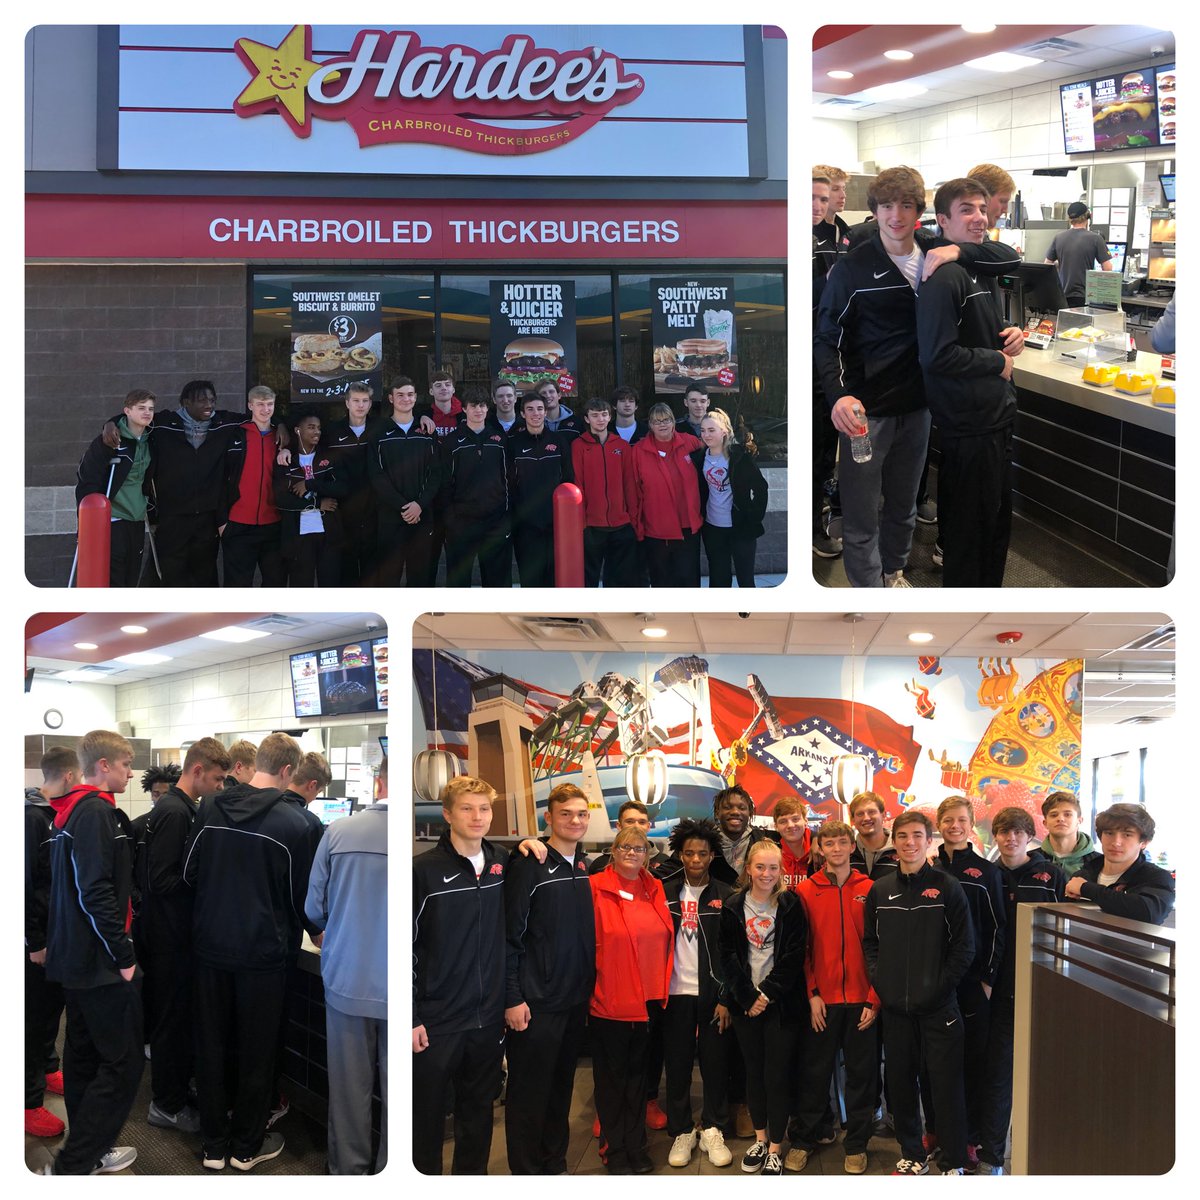 S/O to @BigRedStores for providing our pre-game meal from Hardee’s! The first road trip of the season is off to a great start! #GoPanthers @CabotAthDept